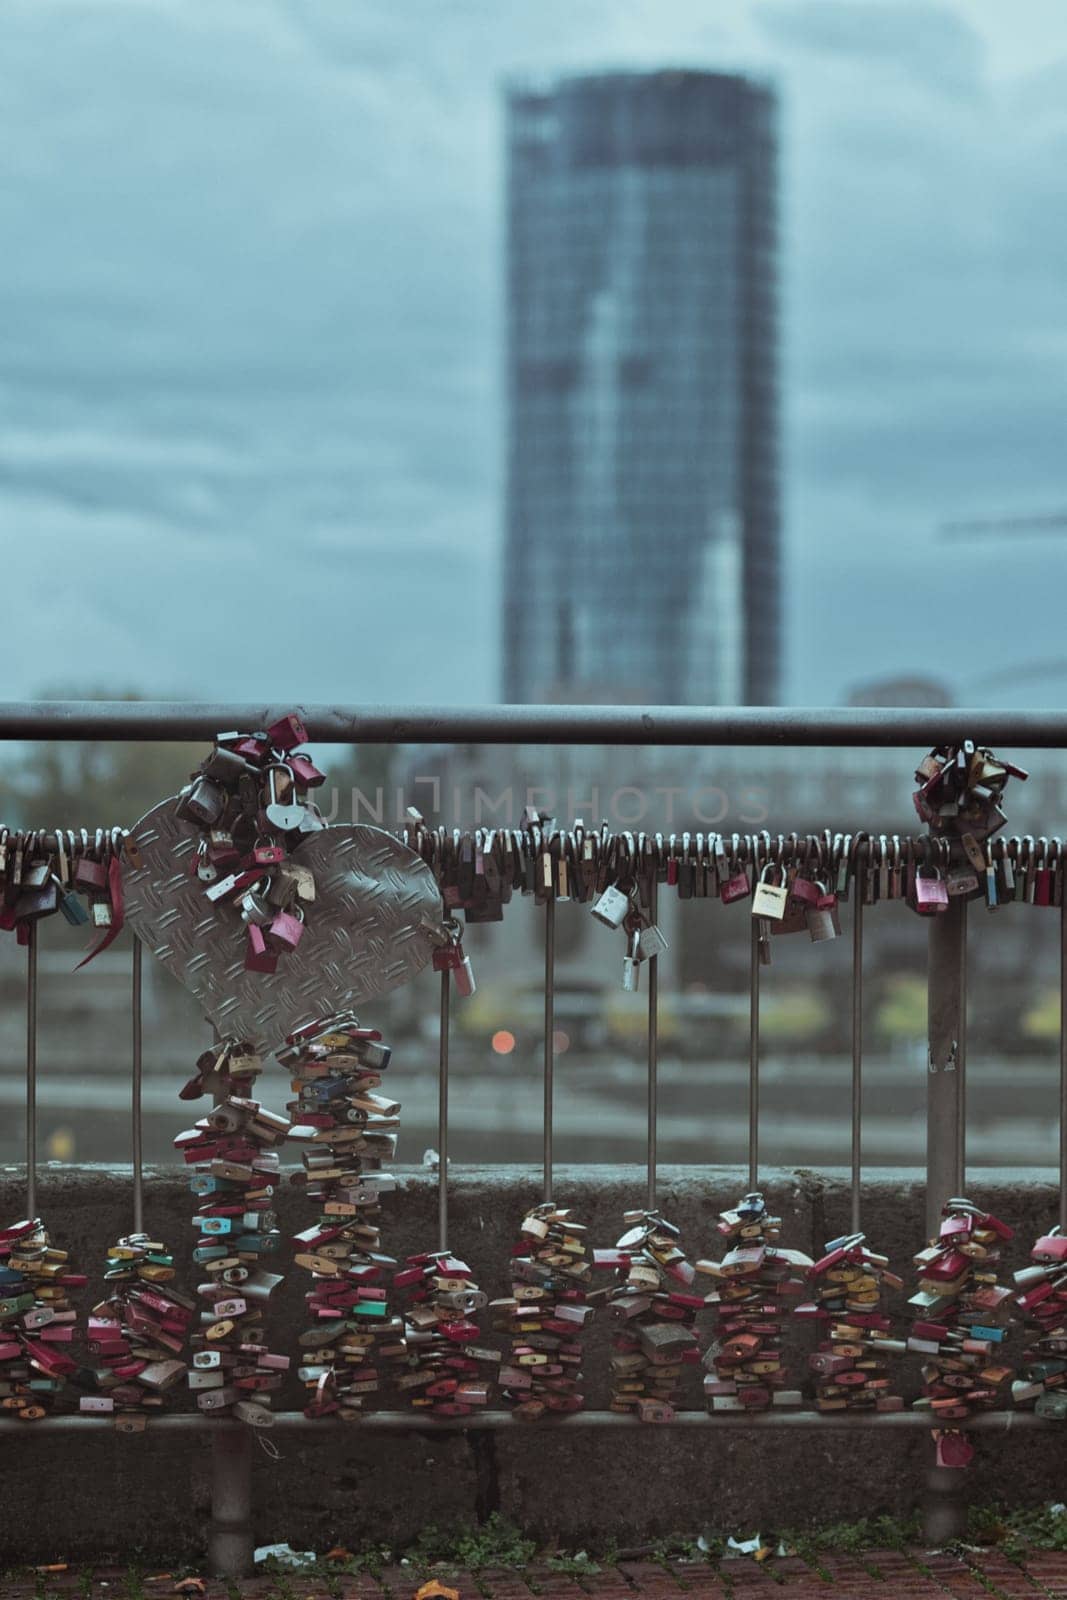 Vertical shot of many love locks on the railing of the Hohenzollern Bridge in Cologne, Germany